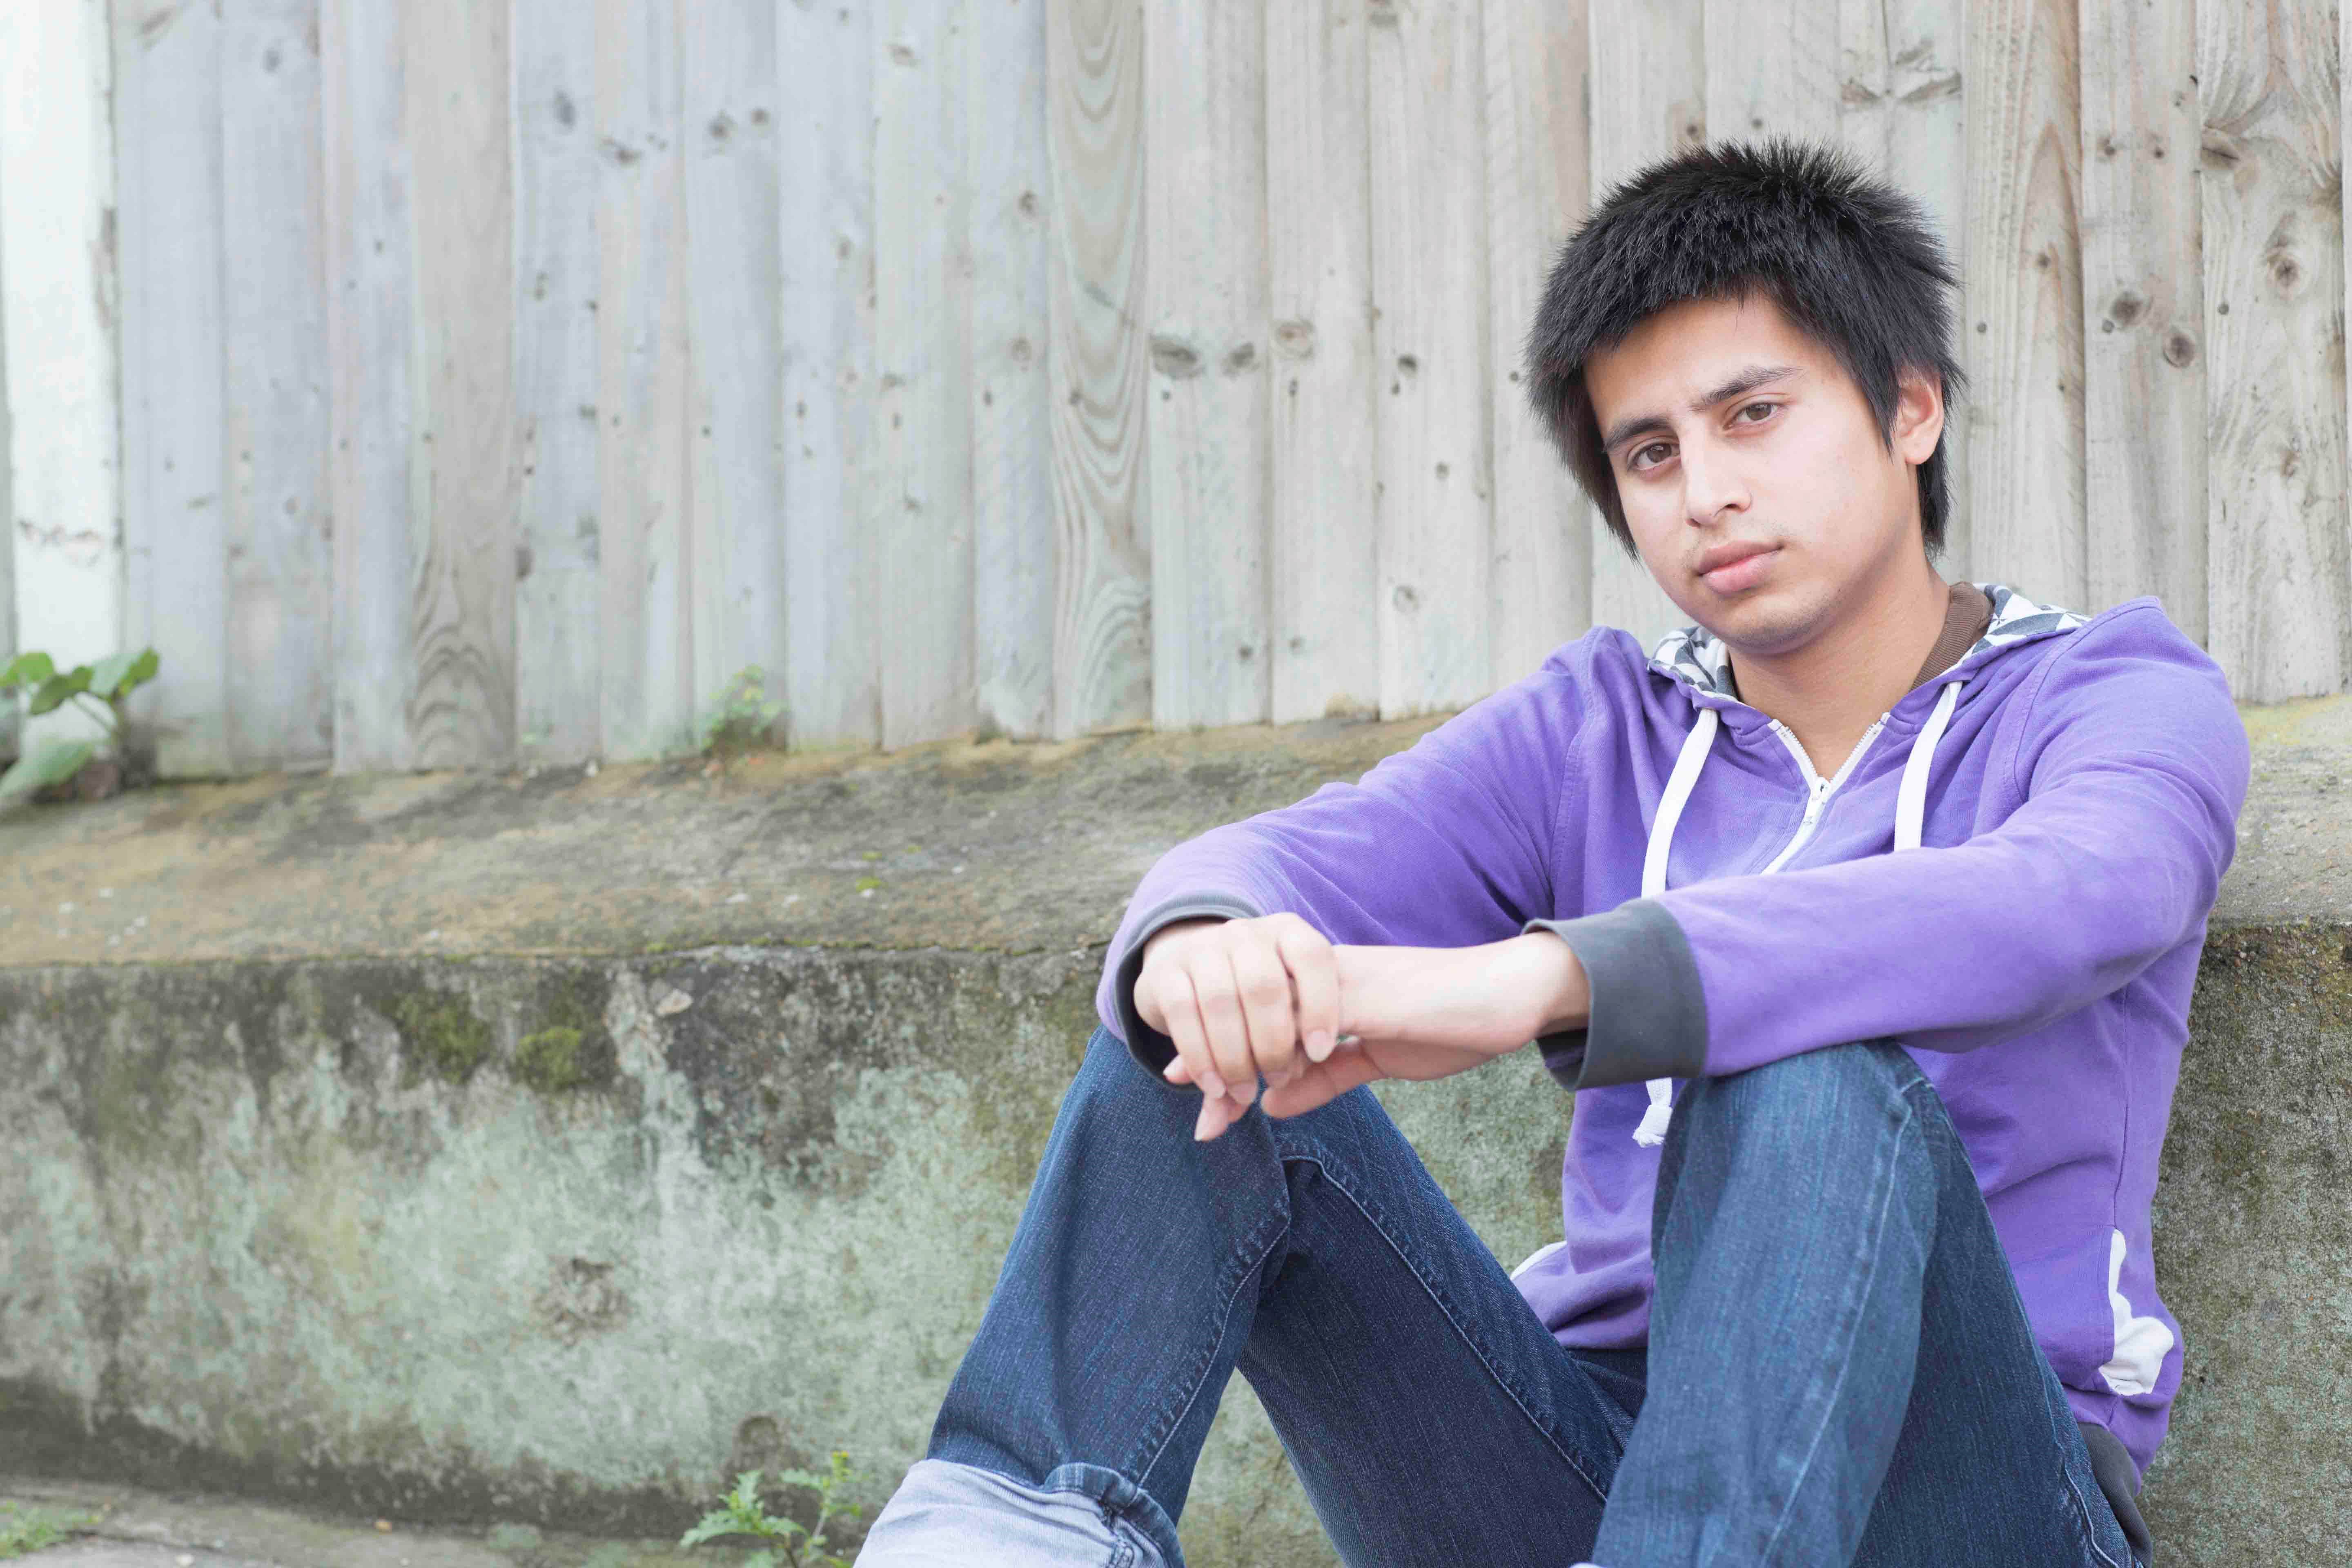 A young man in a purple hoodie and jeans with a neutral expression, sitting outside on the ground leaning against a fence.